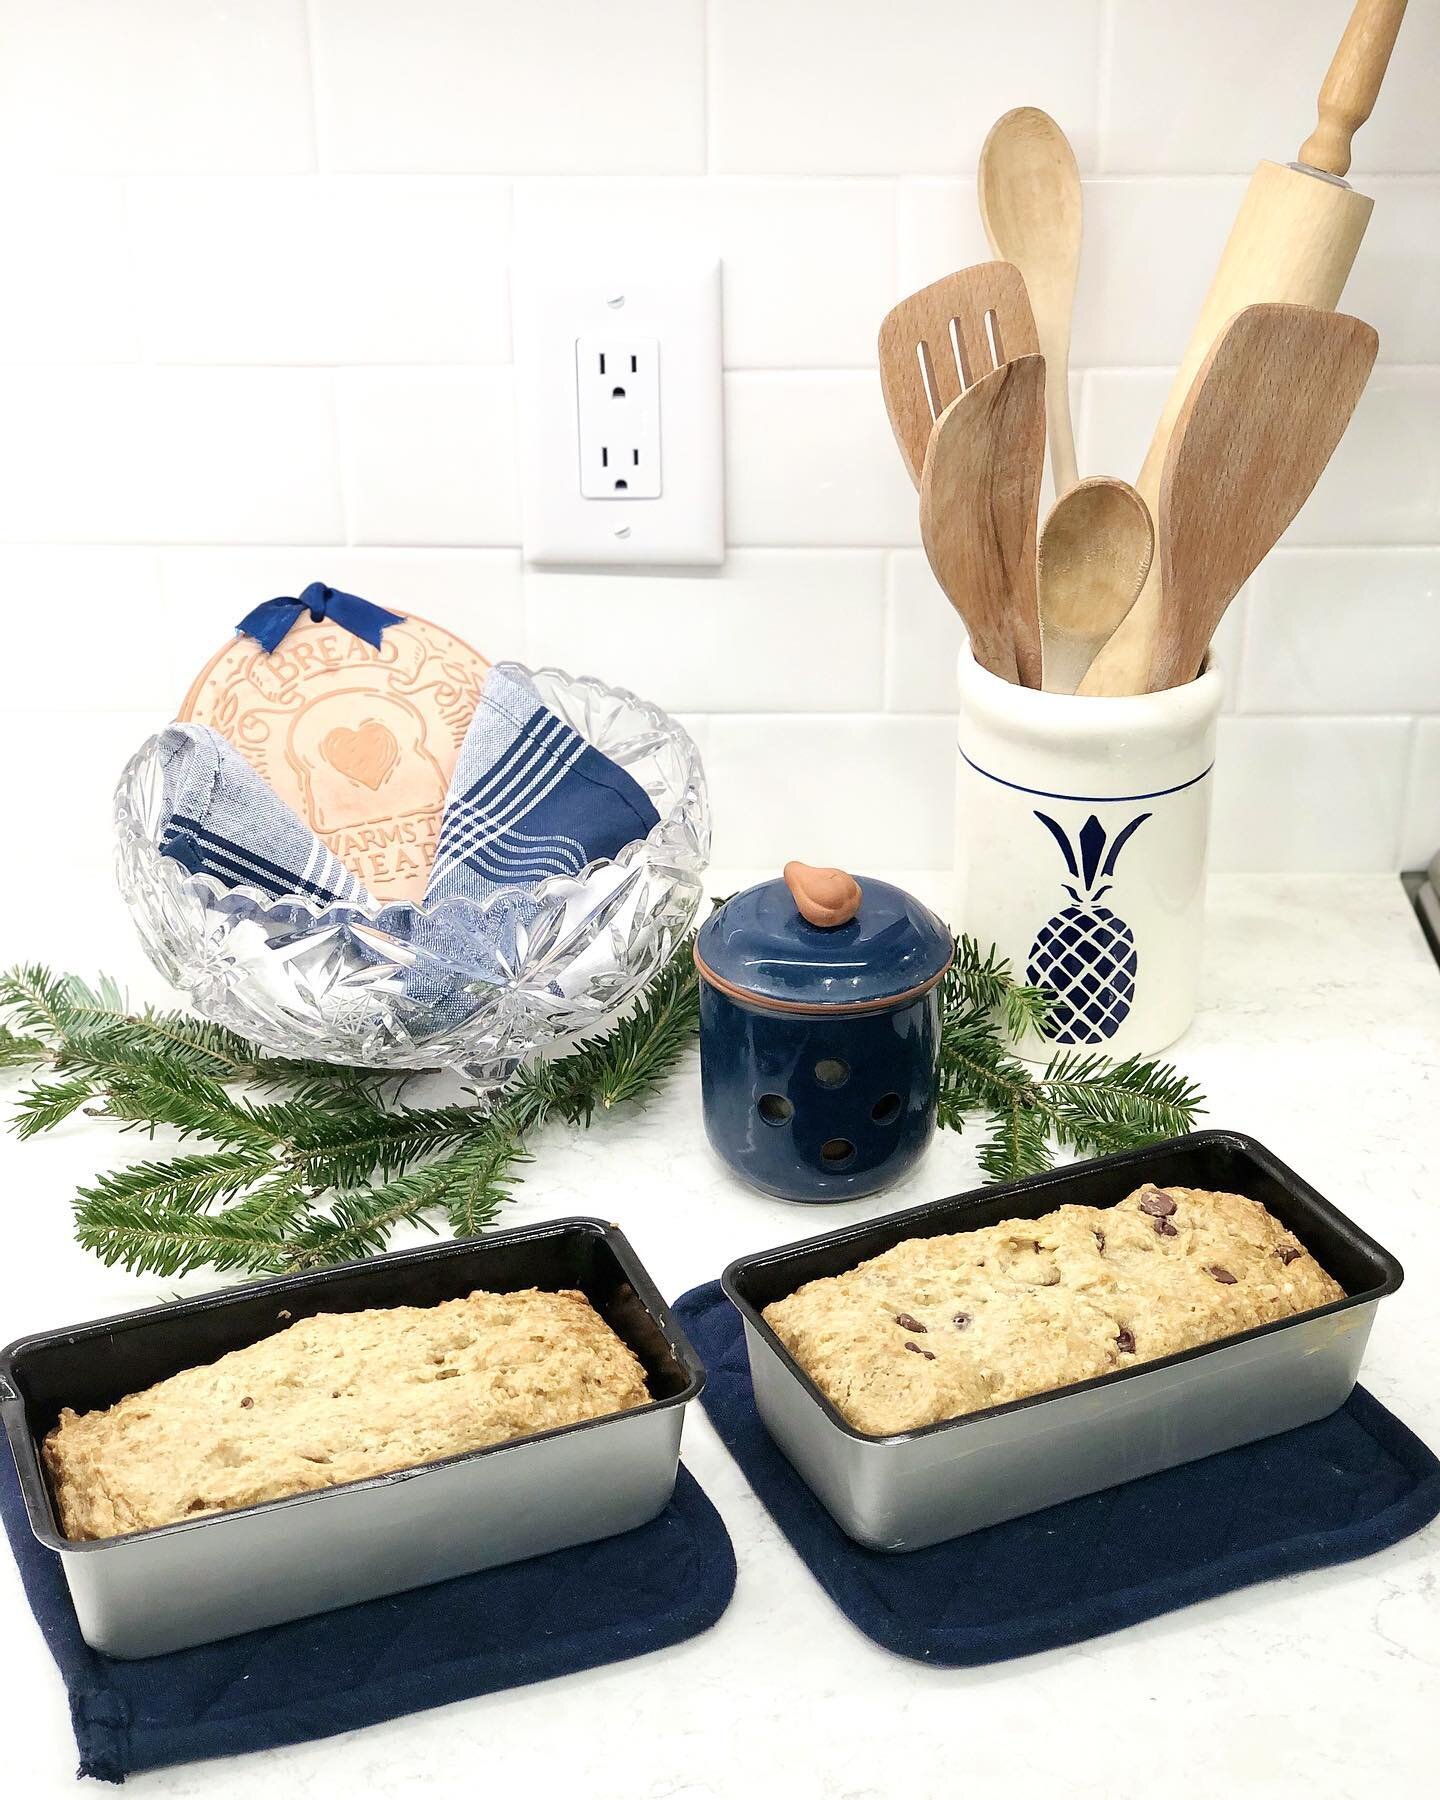 Are any of you eating Gluten Free? This banana bread recipe that I&rsquo;ve had for many years is really great converted to using gluten free flour in the ingredients.

Our kitchen smells so good when this bread is baking.
This Christmas will not be 